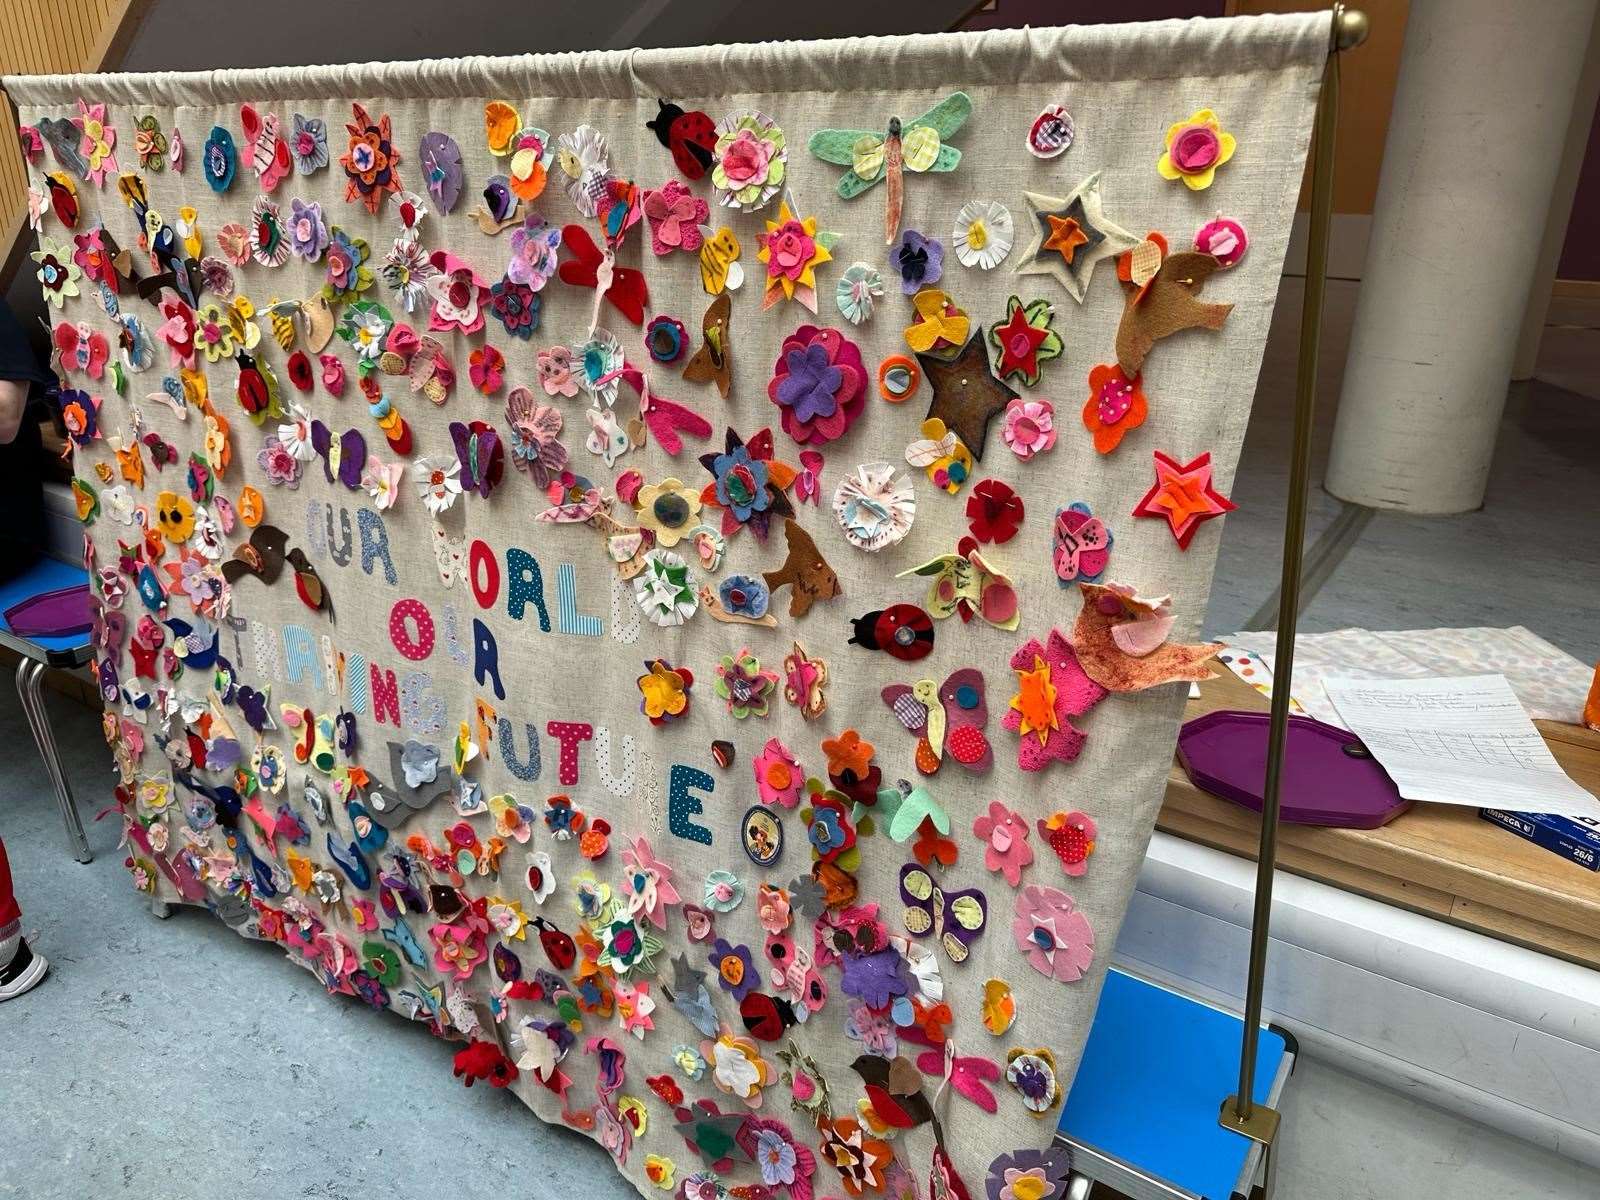 Thinking Day was celebrated by the Ellon Girl Guides who created new artwork.